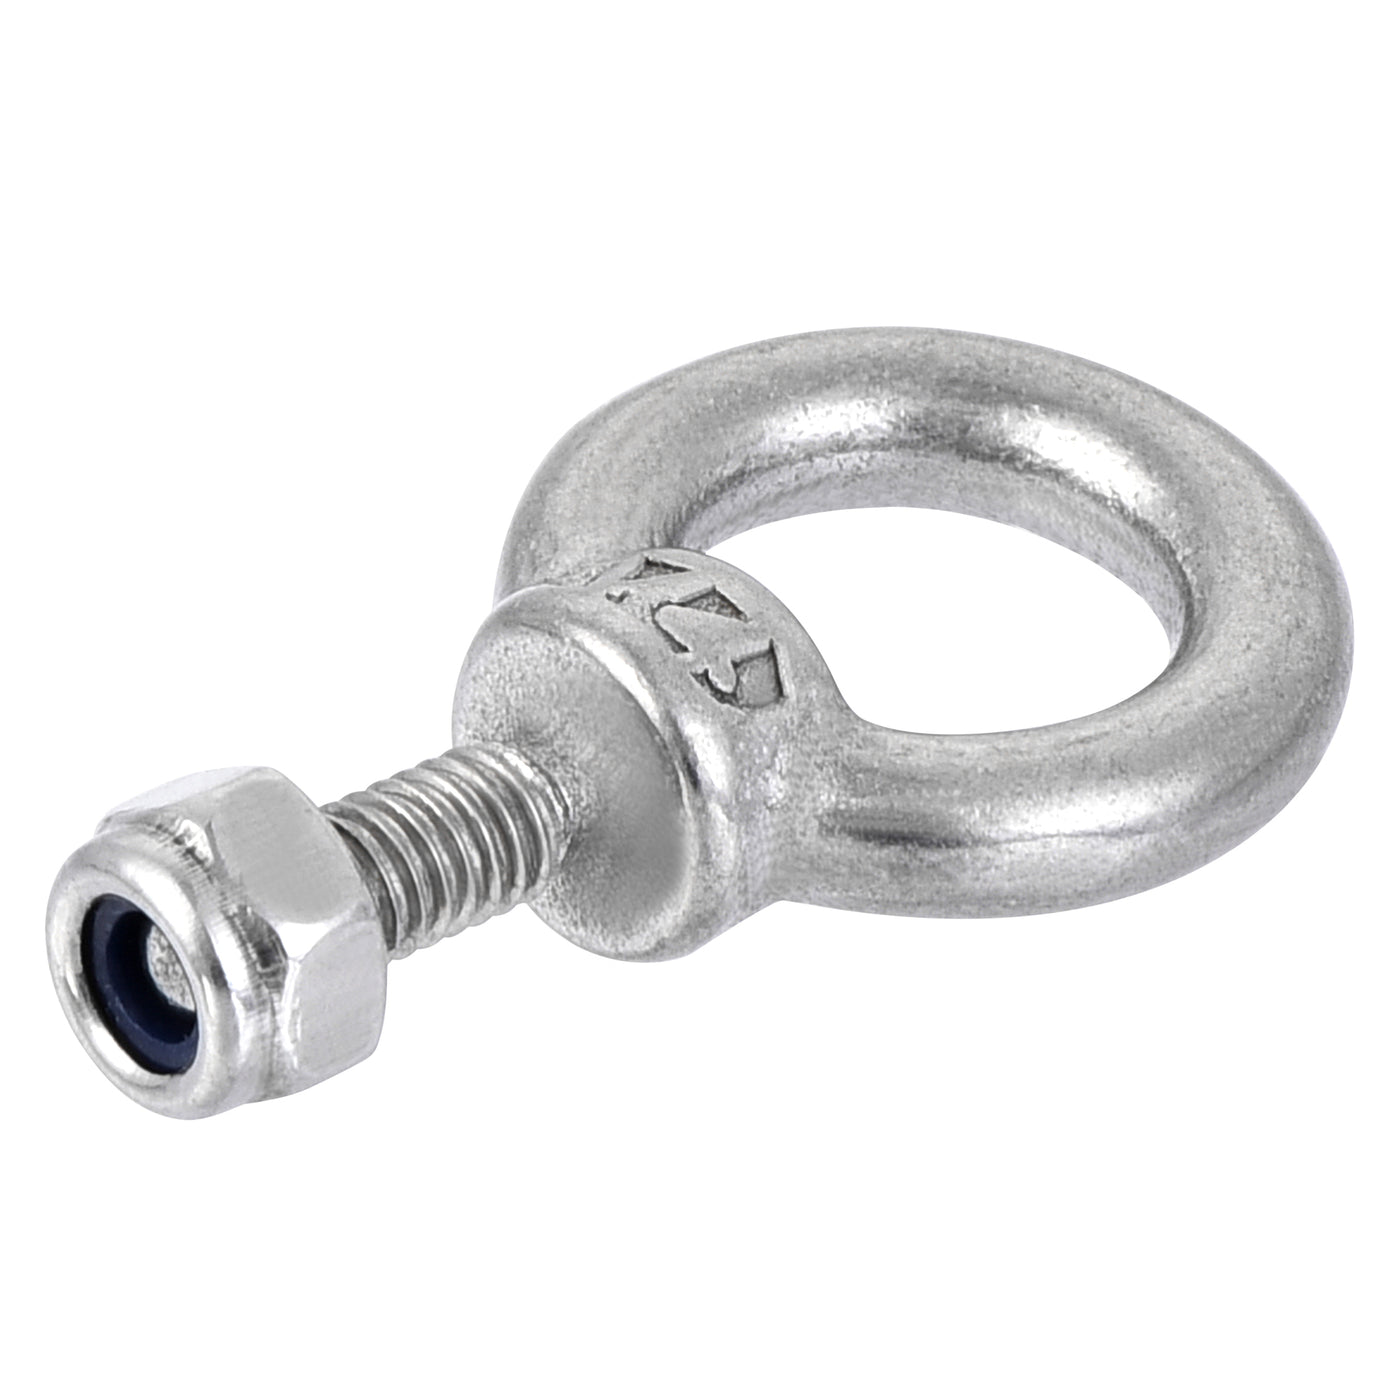 uxcell Uxcell Lifting Eye Bolt M4 x 11mm Male Thread with Hex Screw Nut for Hanging, 304 Stainless Steel, 6 Sets